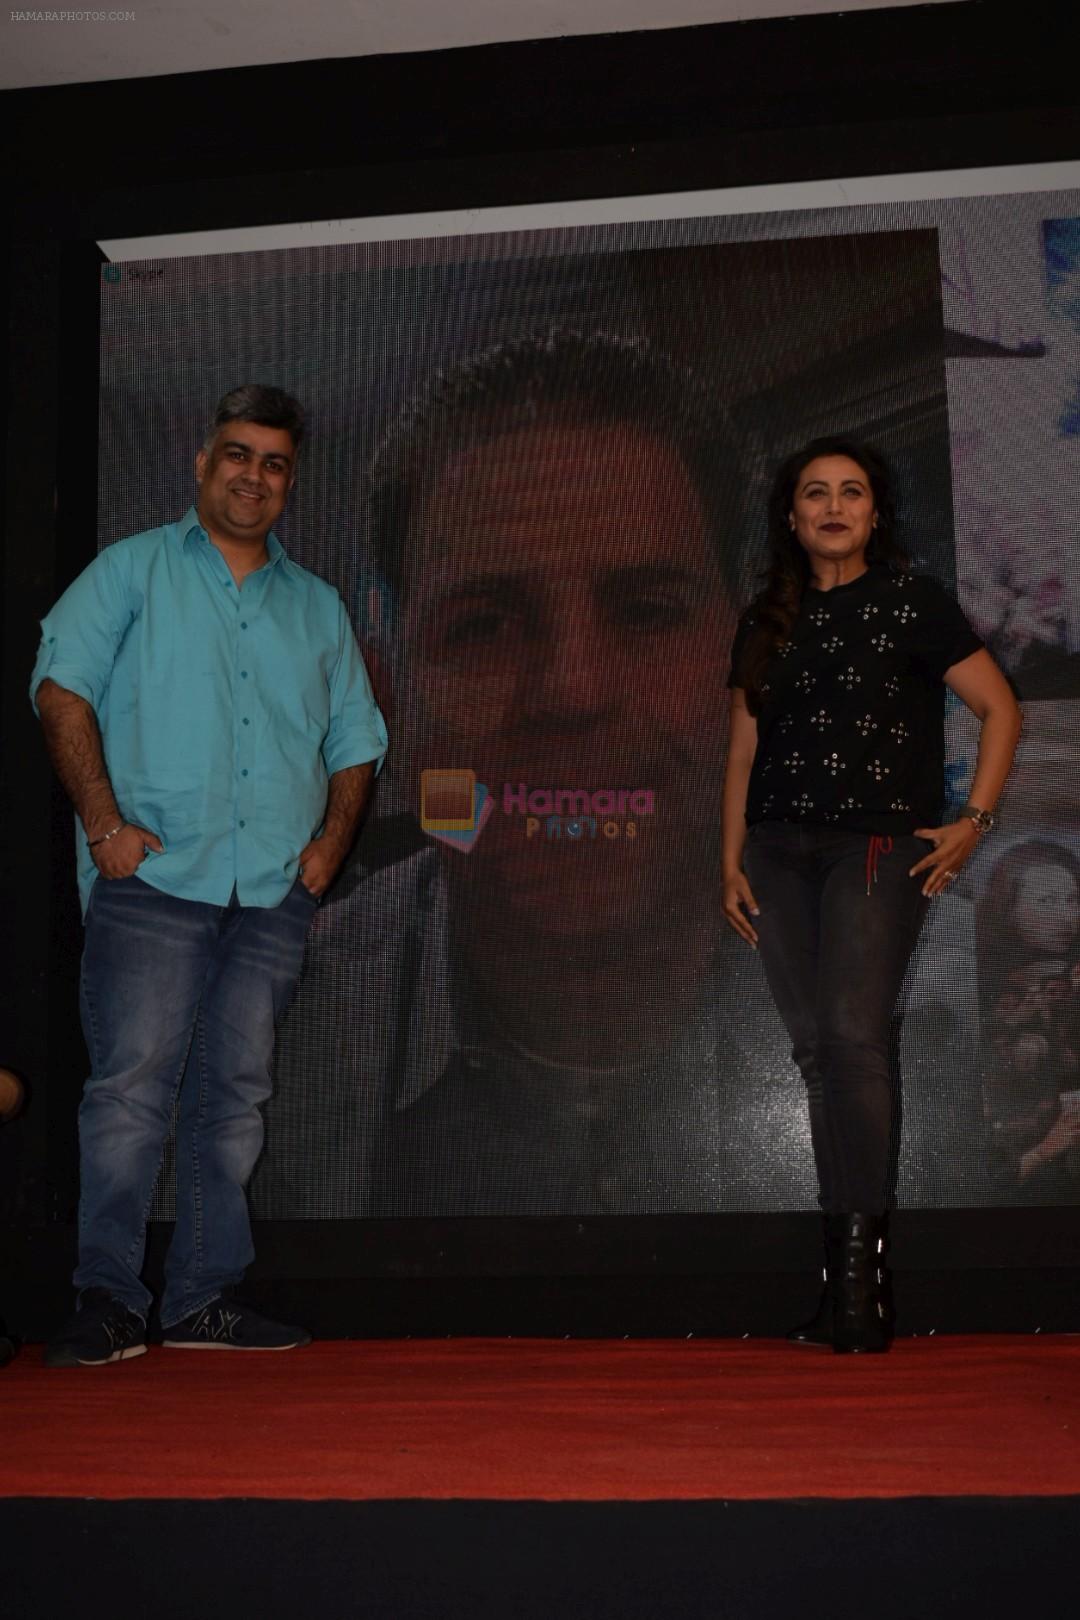 Rani Mukerji To Introduce Brad Cohen The Real Inspiration Behind Hichki on 12th March 2018